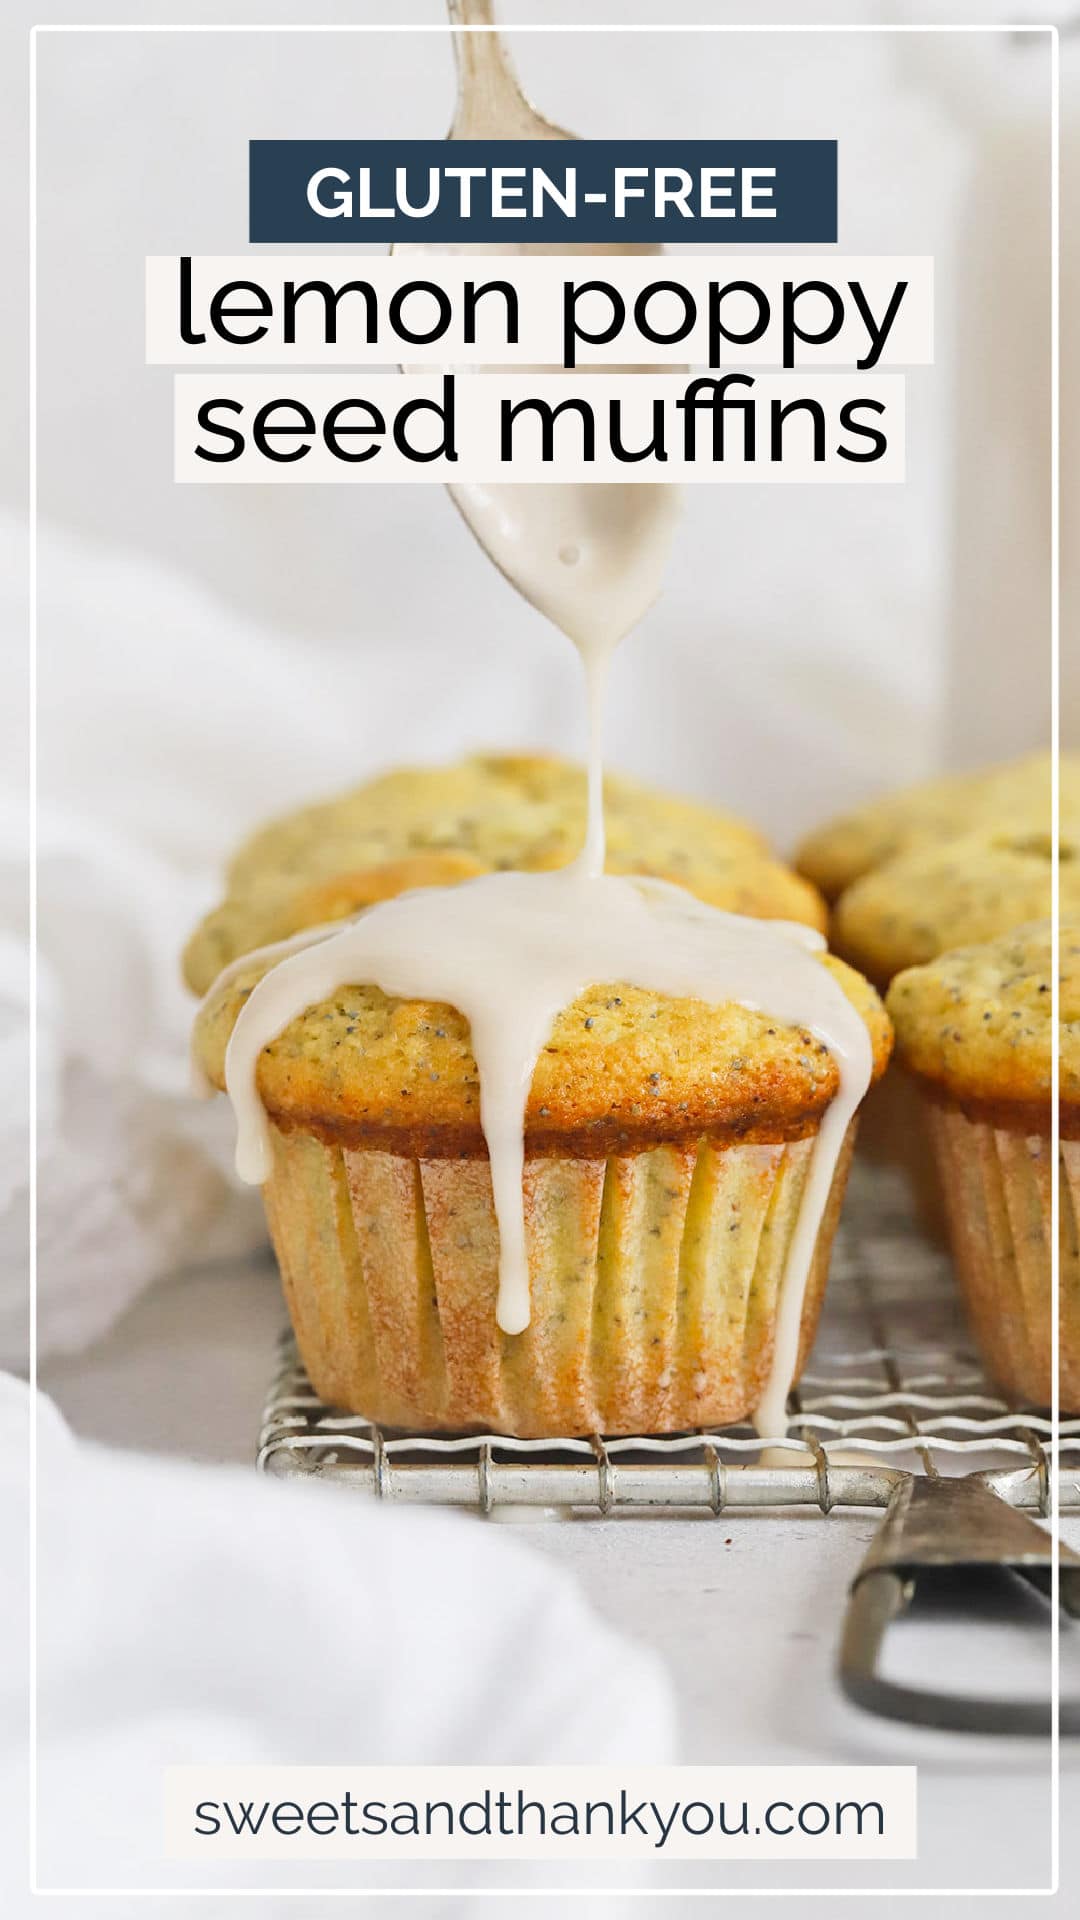 Gluten-Free Lemon Poppy Seed Muffins - These bright, sunny gluten-free lemon muffins are a total DREAM! Fluffy and citrusy with every bite. (Dairy-Free) // gluten free poppyseed muffins // gluten-free lemon poppyseed muffins // lemon poppy seed muffins recipe // lemon muffins recipe // gluten-free brunch // gluten-free muffins // gluten-free poppy seed muffins with glaze